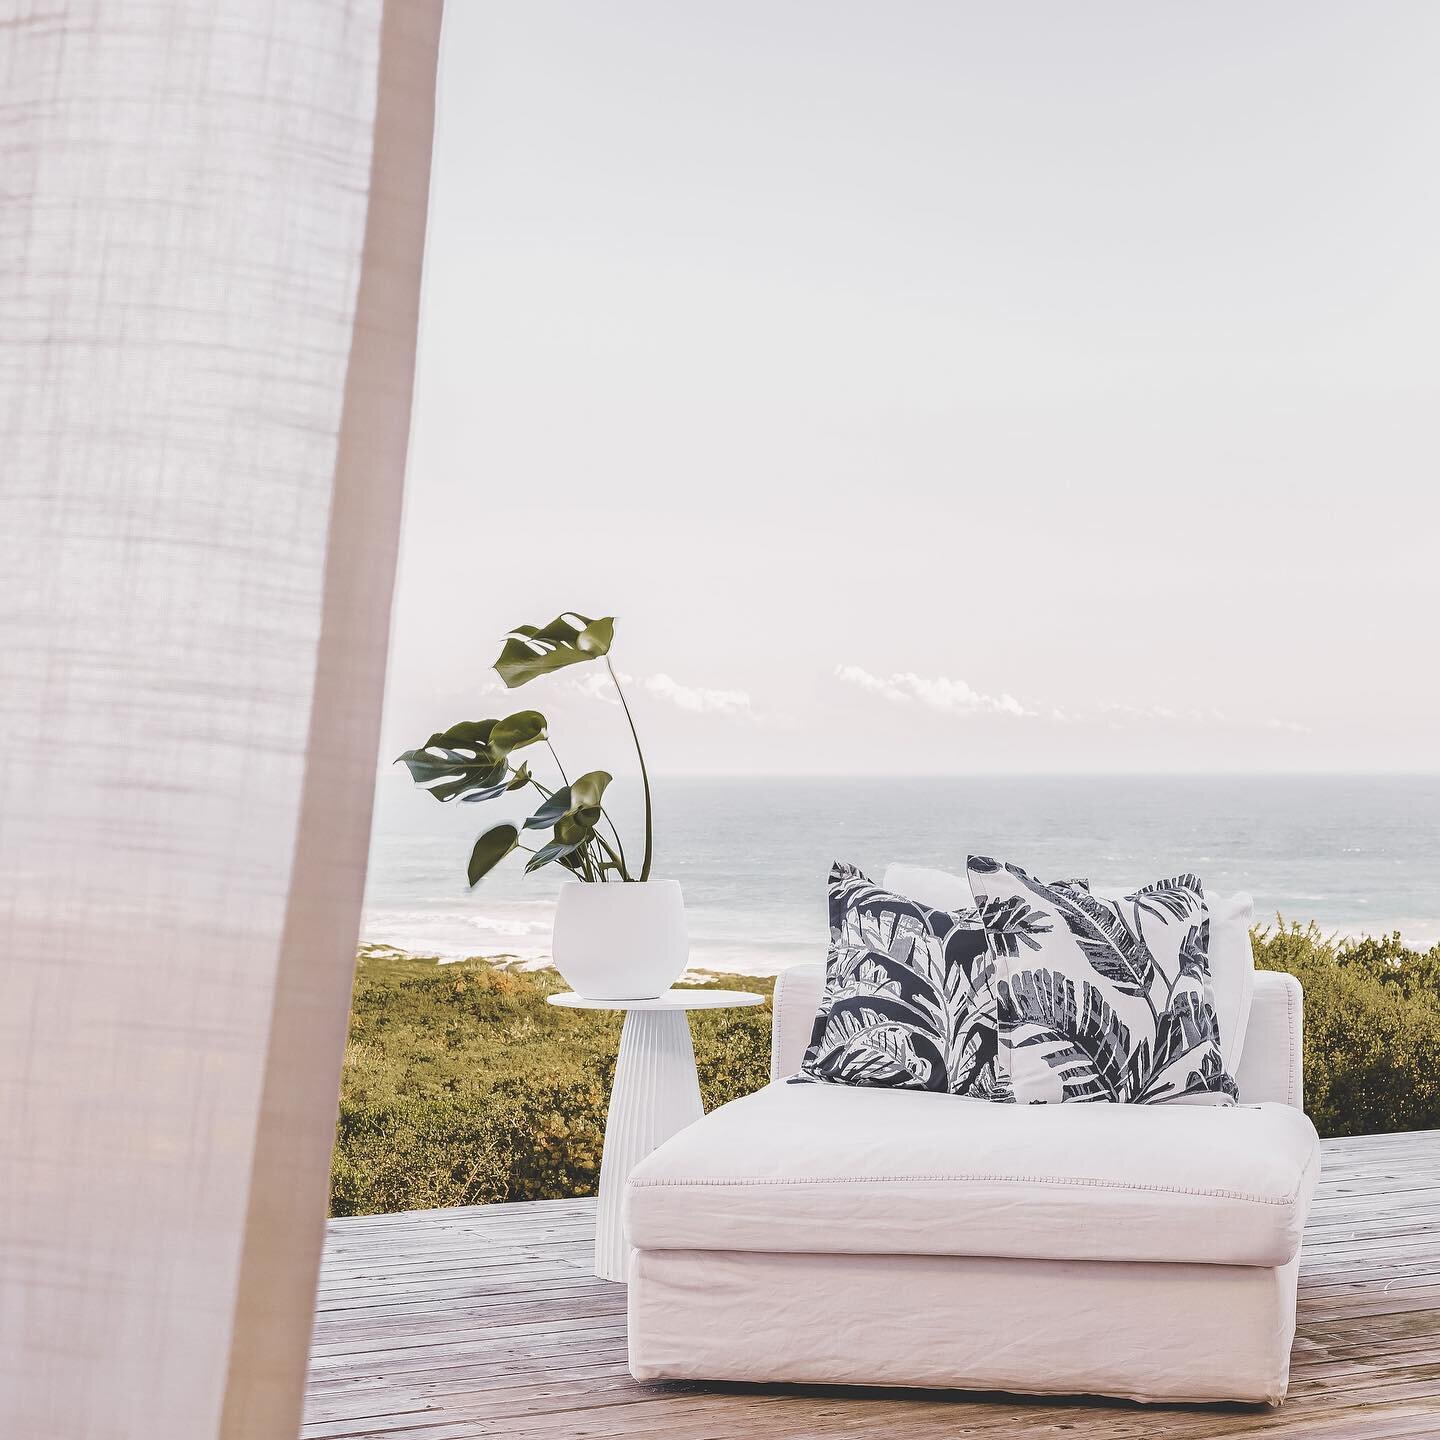 GRAN CANARIA from Hertex

These locally woven reversible jacquards are suitable for both the coastal and inland South African outdoor and indoor lifestyles.

#incainteriors #interior #interiordecor #decor #fabric #hertex #interiorsofsouthafrica #deco